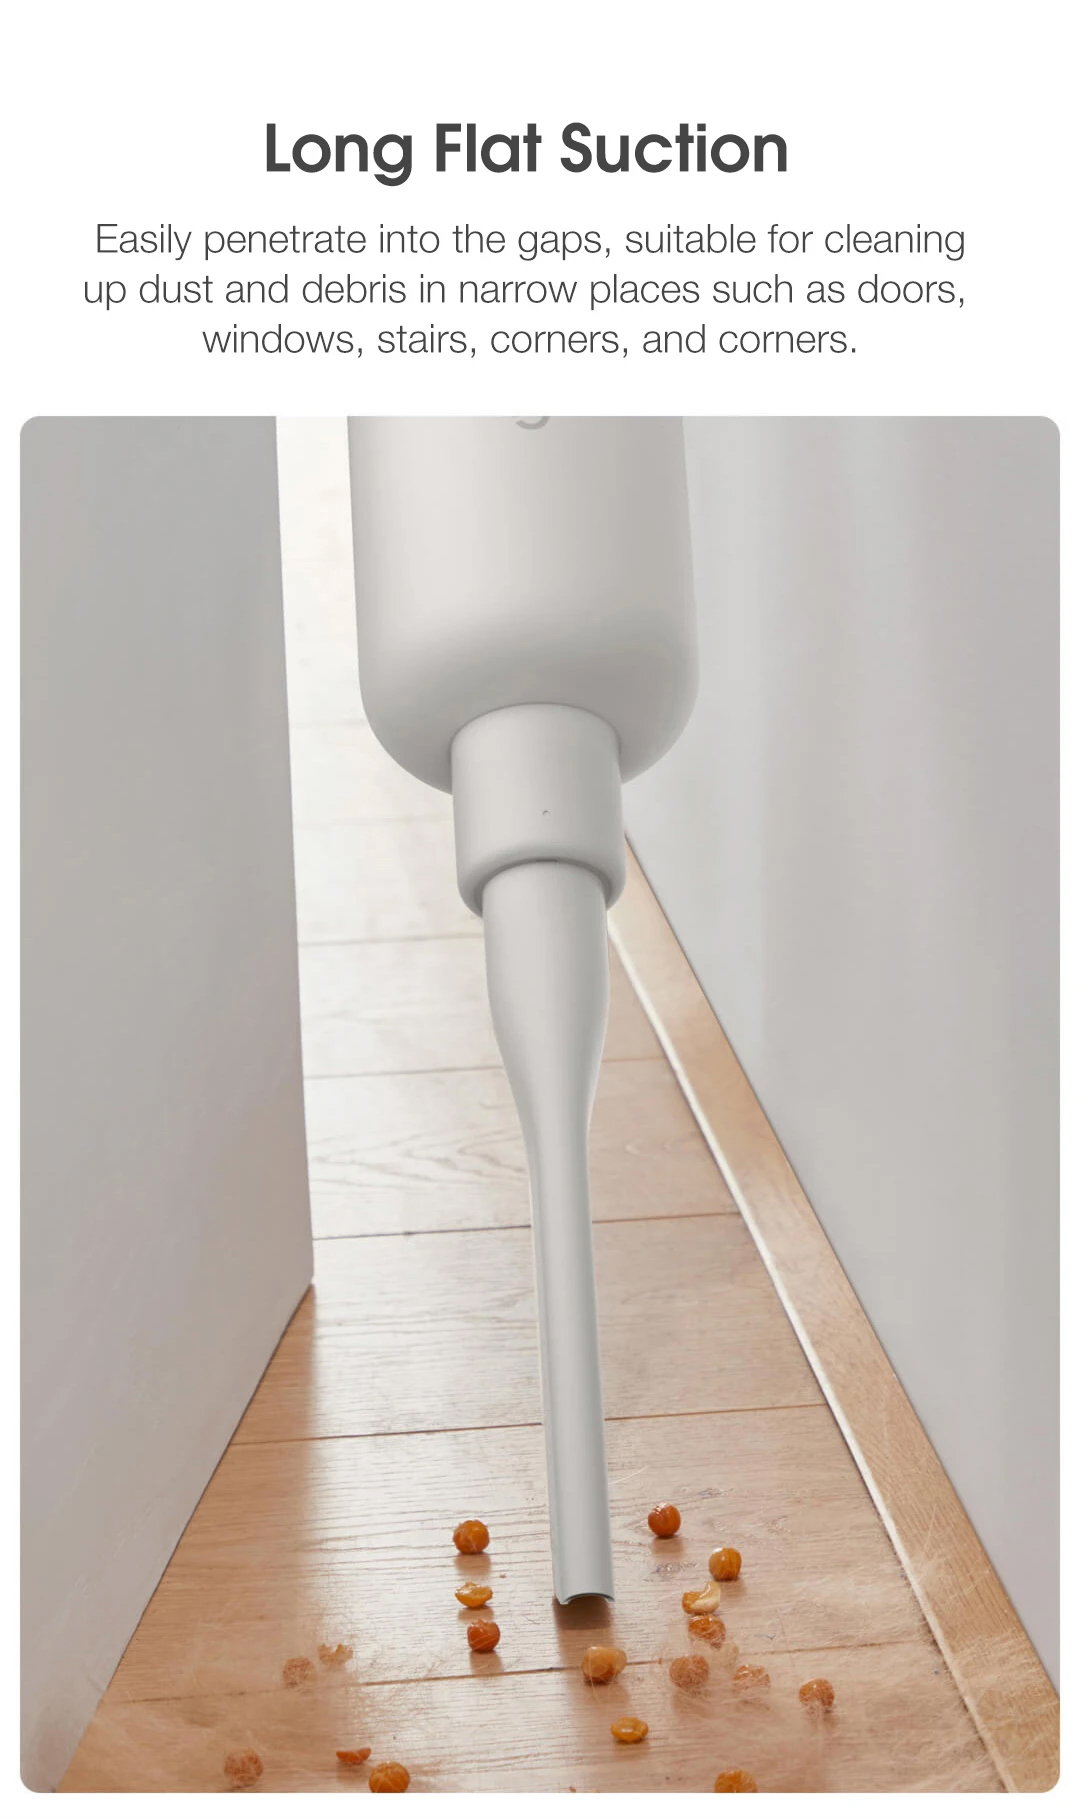 Long Flat Suction Easily penetrate into the gaps, suitable for cleaning up dust and debris in narrow places such as doors, windows, stairs, corners, and corners.